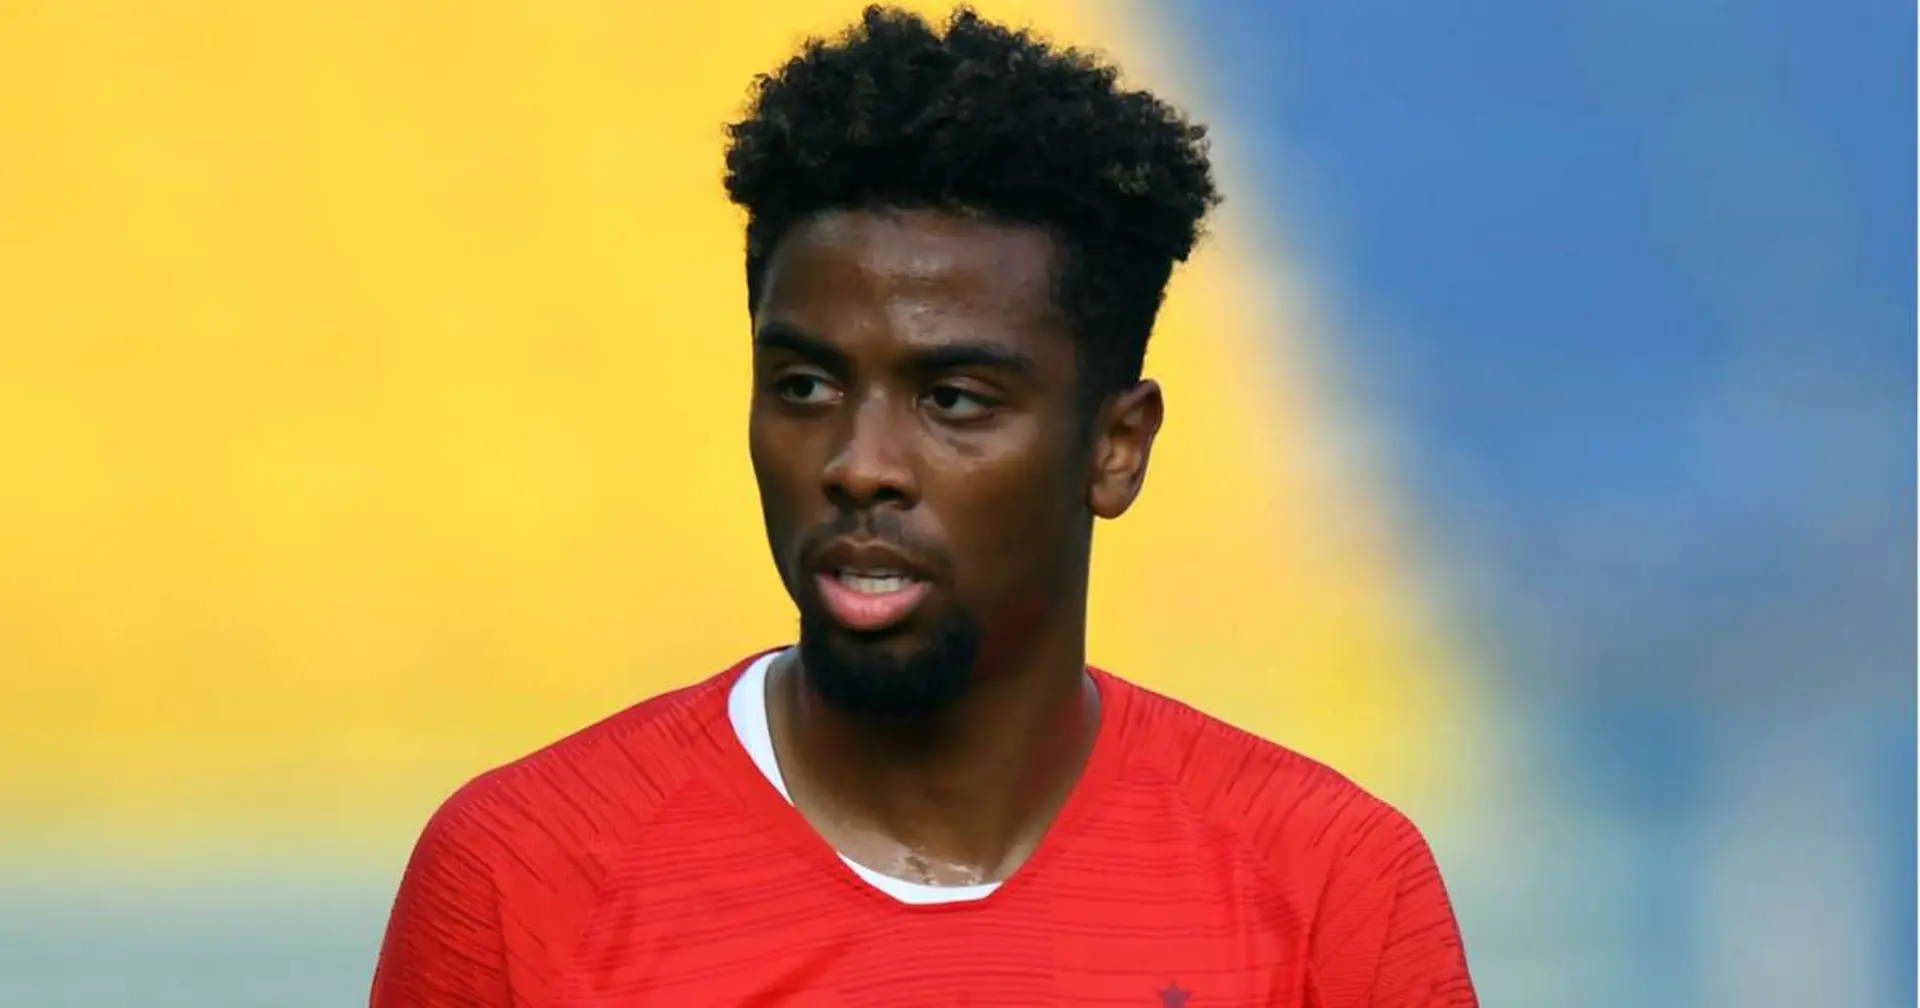 'Sports aspect' - not money - said to be reason behind Angel Gomes' Old Trafford exit